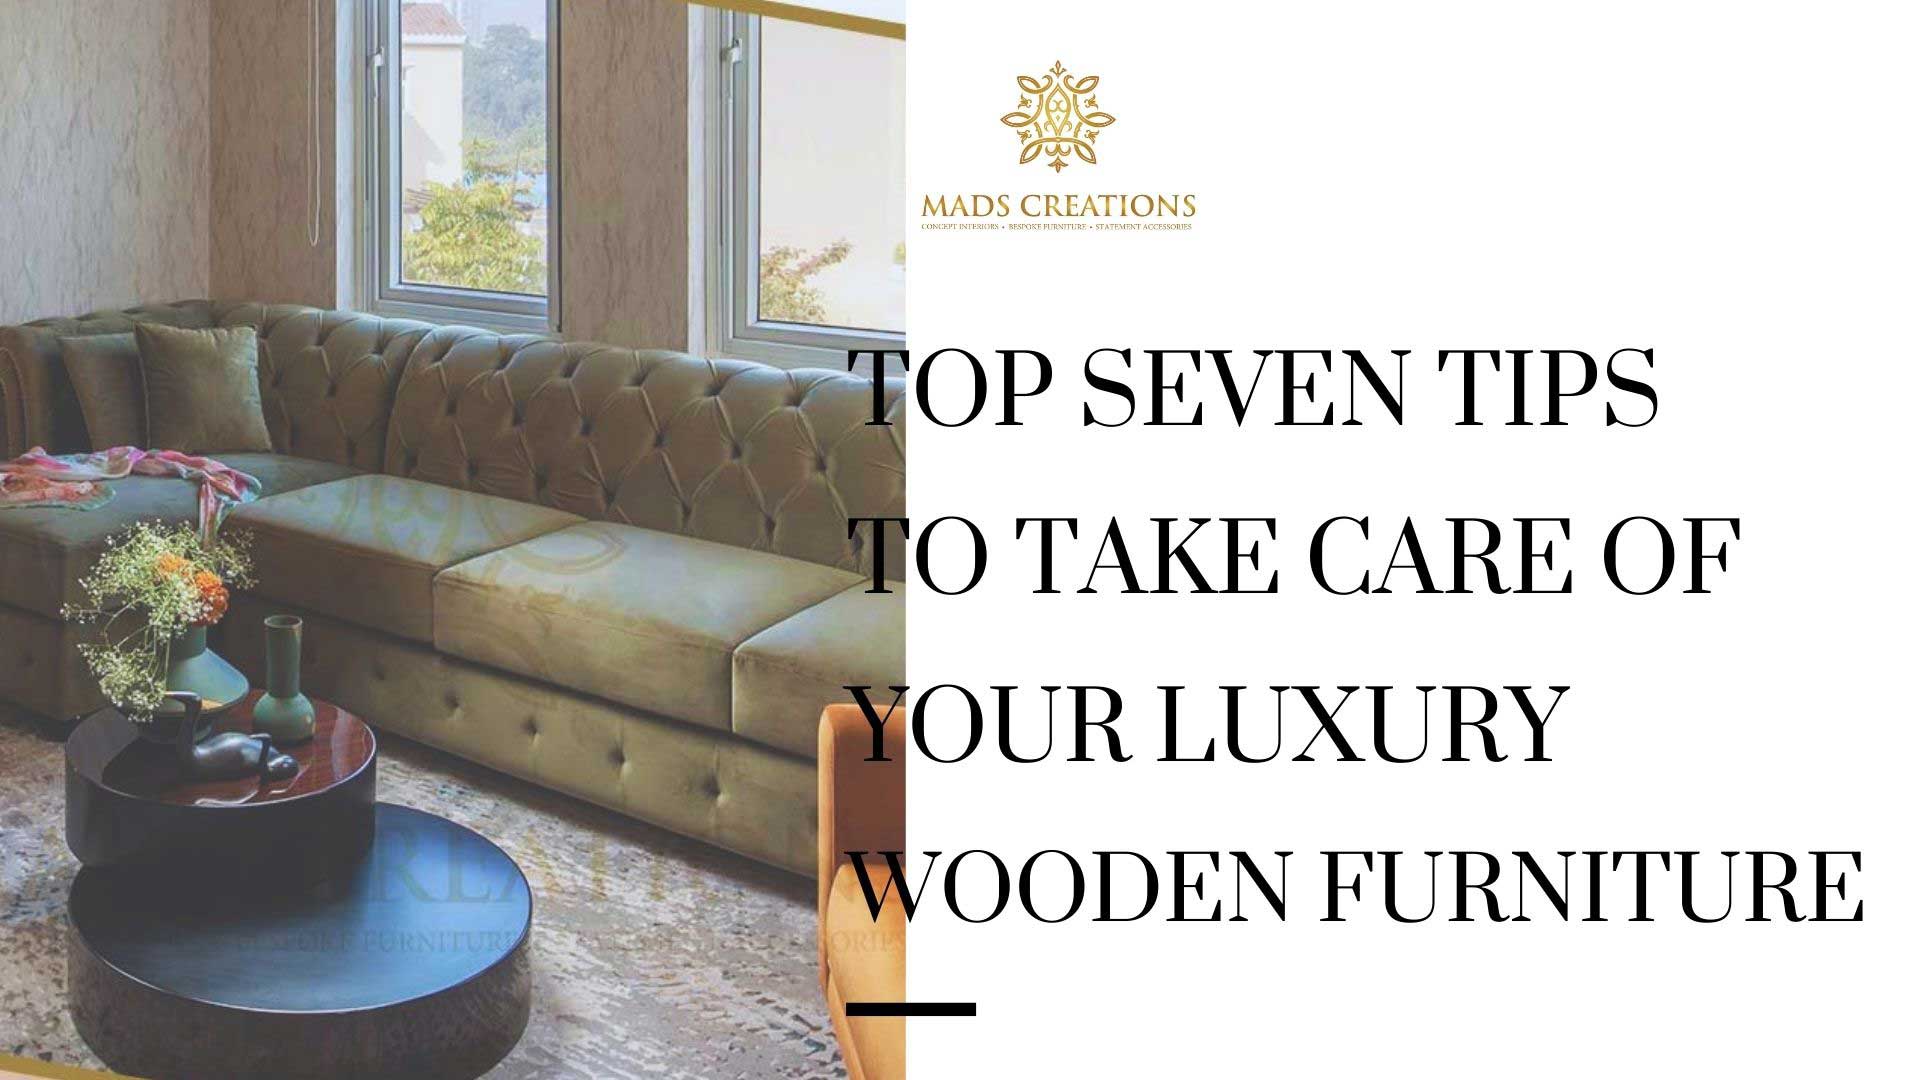 Top seven tips to take care of your luxury wooden furniture